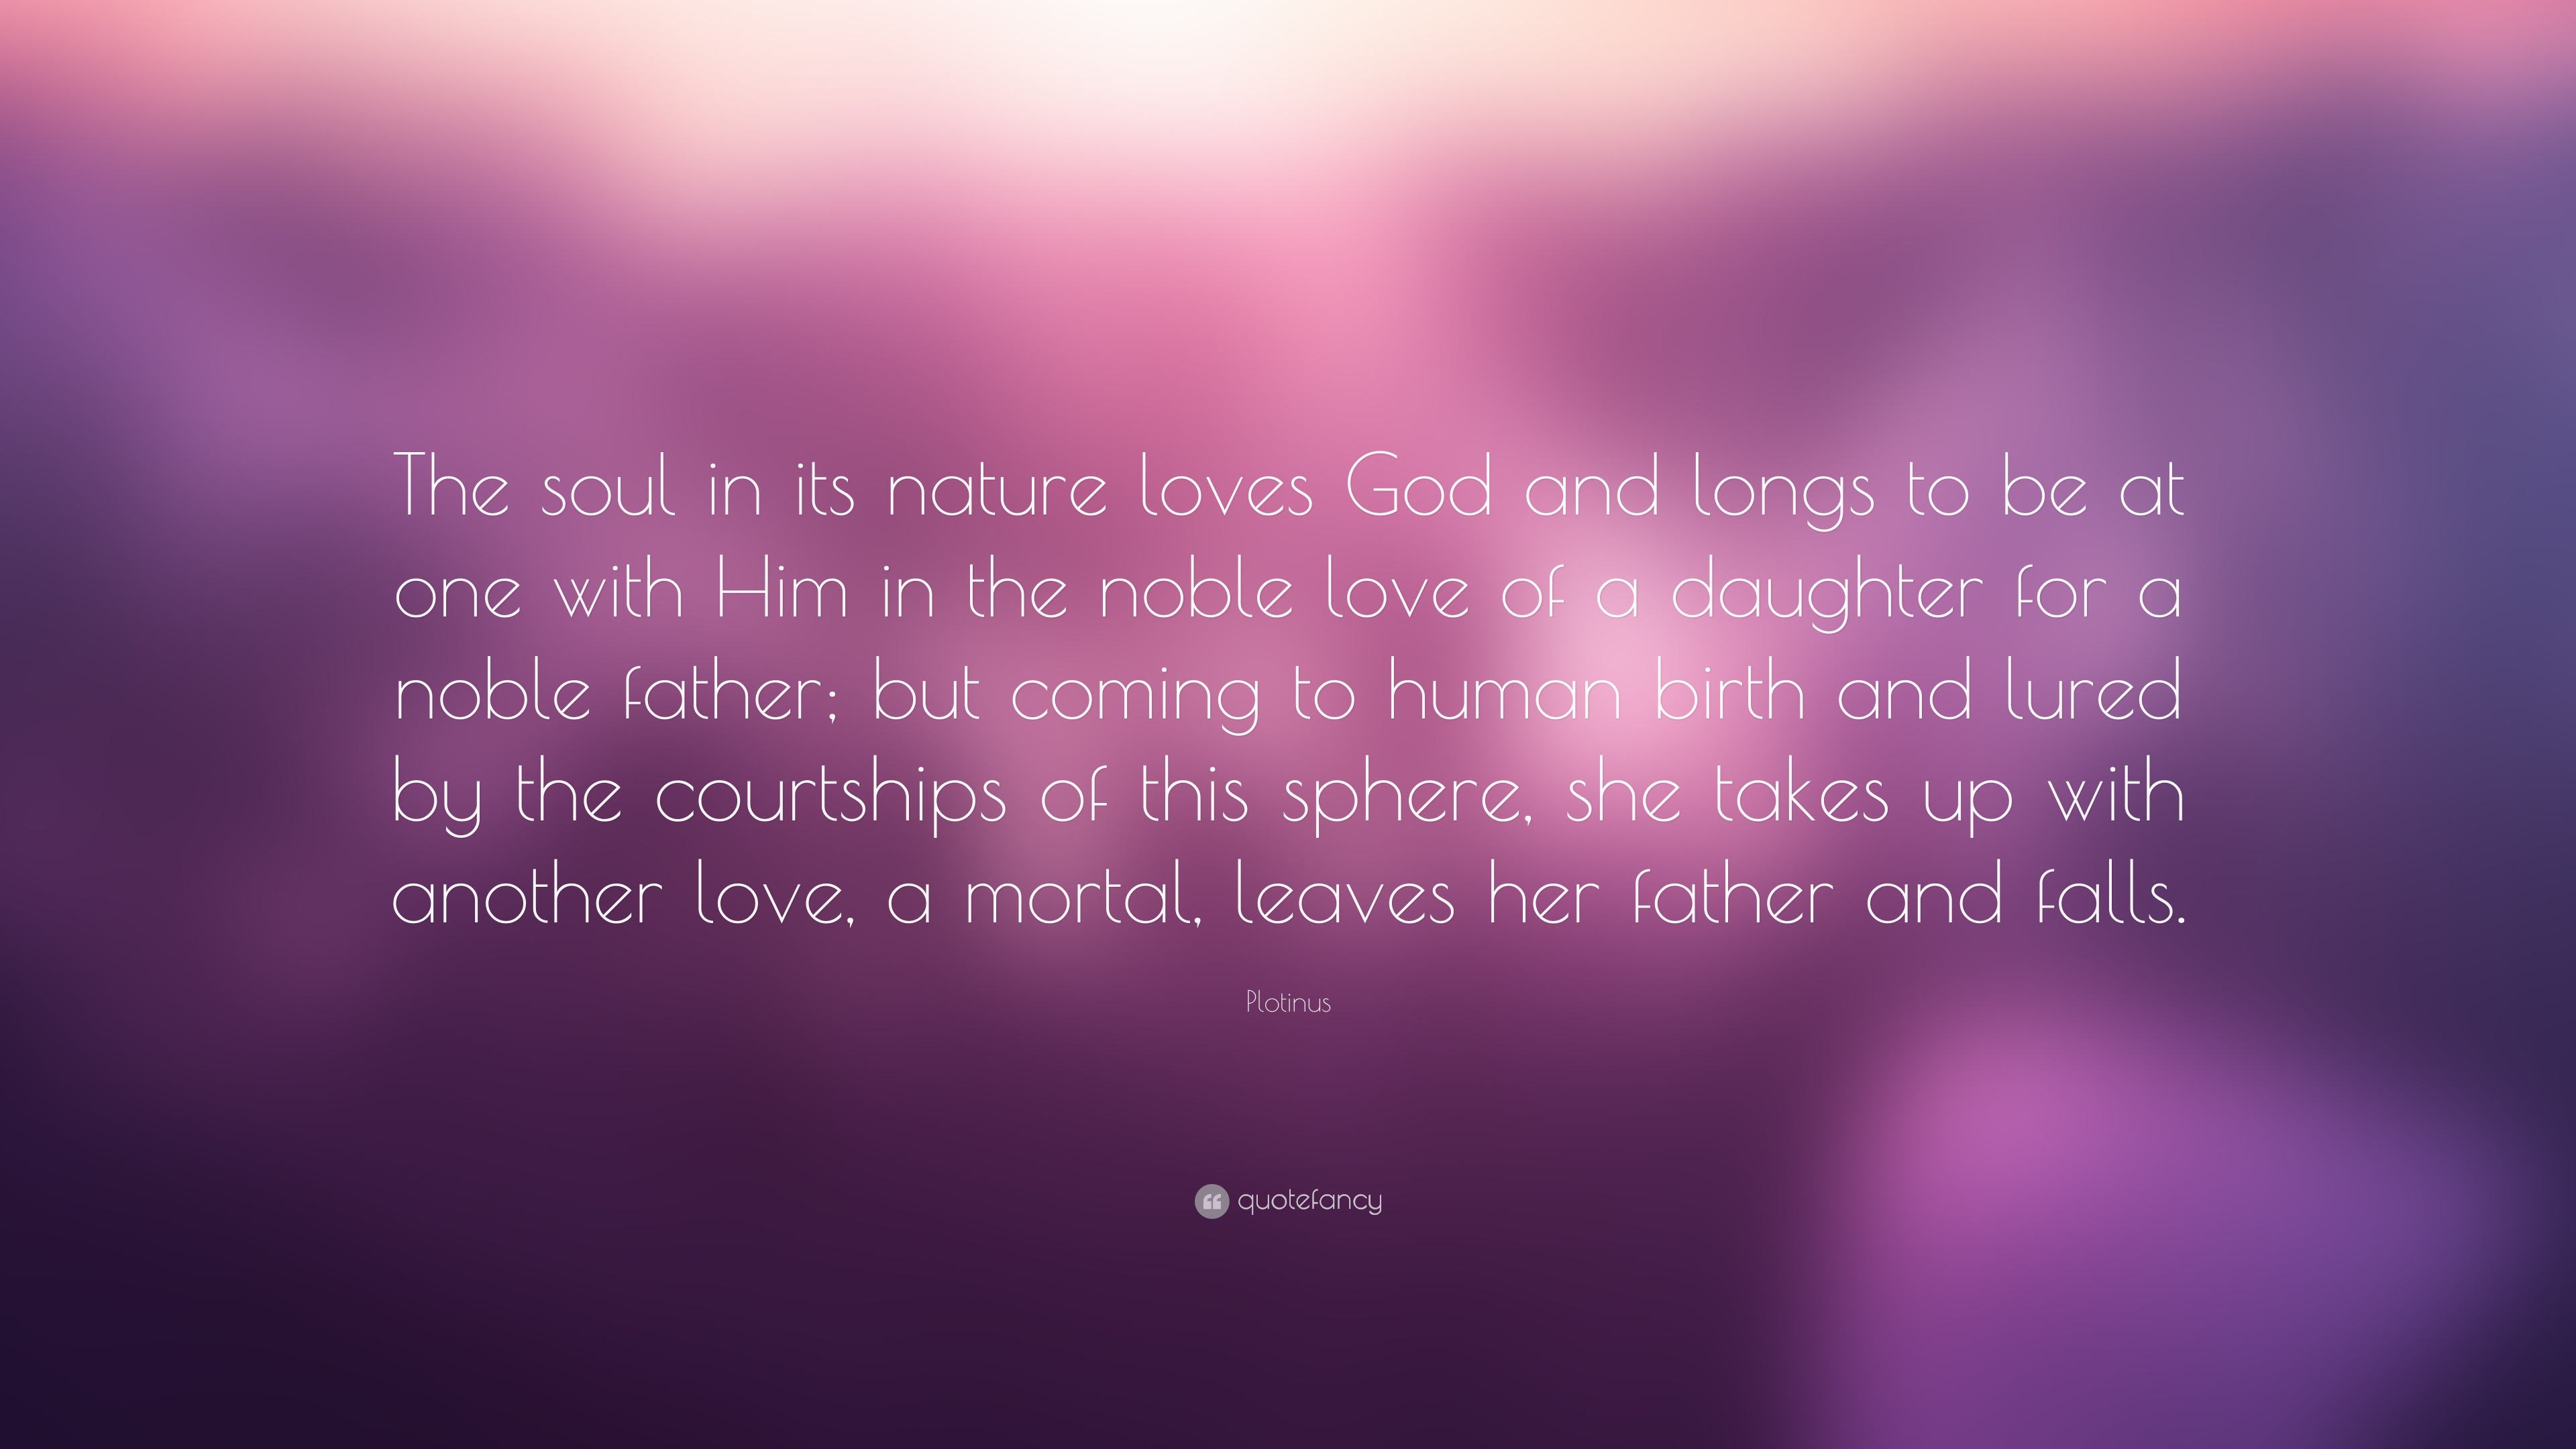 Plotinus Quote “The soul in its nature loves God and longs to be at